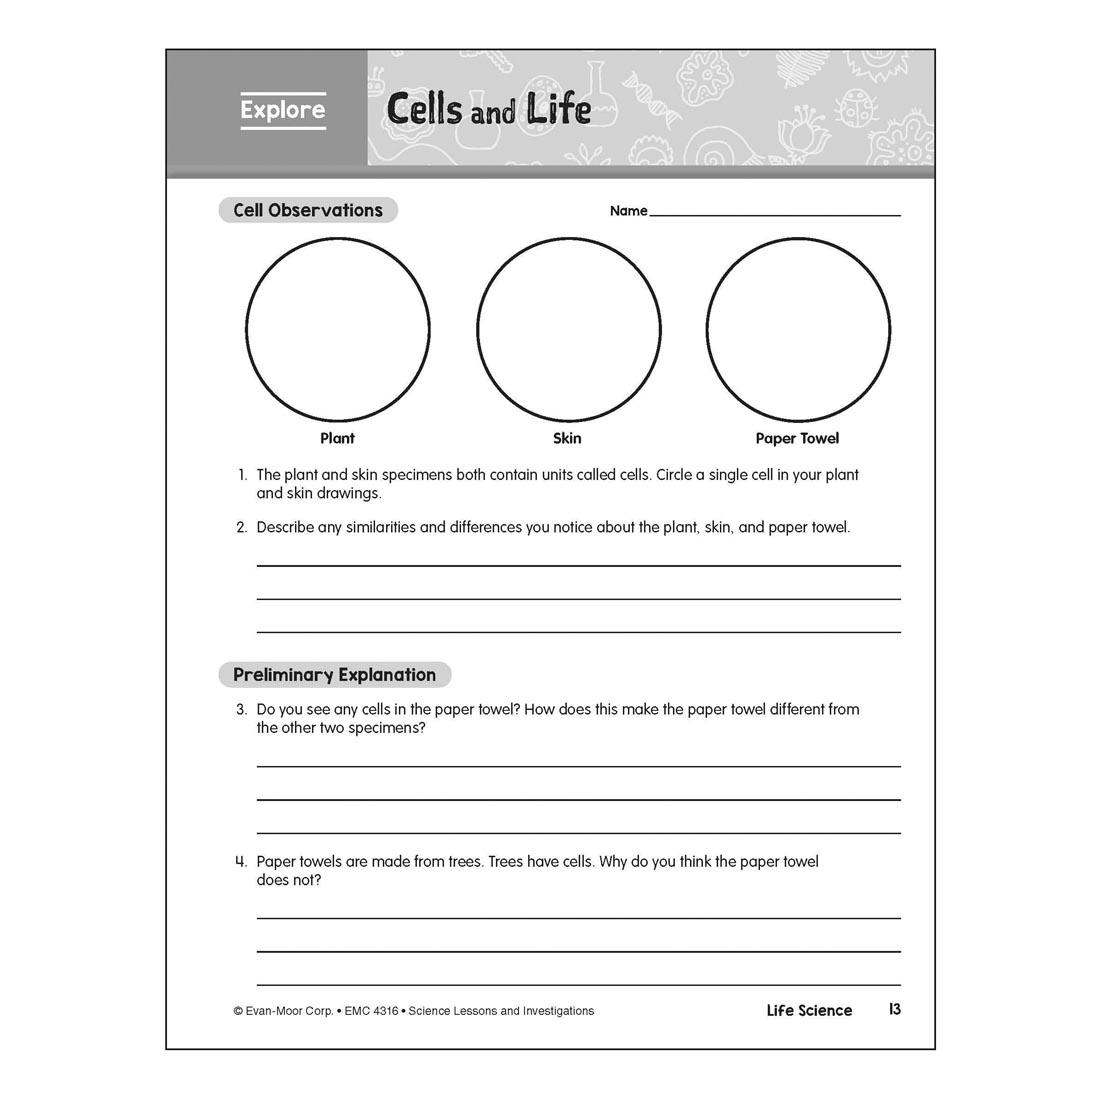 Cells and Life page from Evan-Moor Science Lessons & Investigations Grade 6